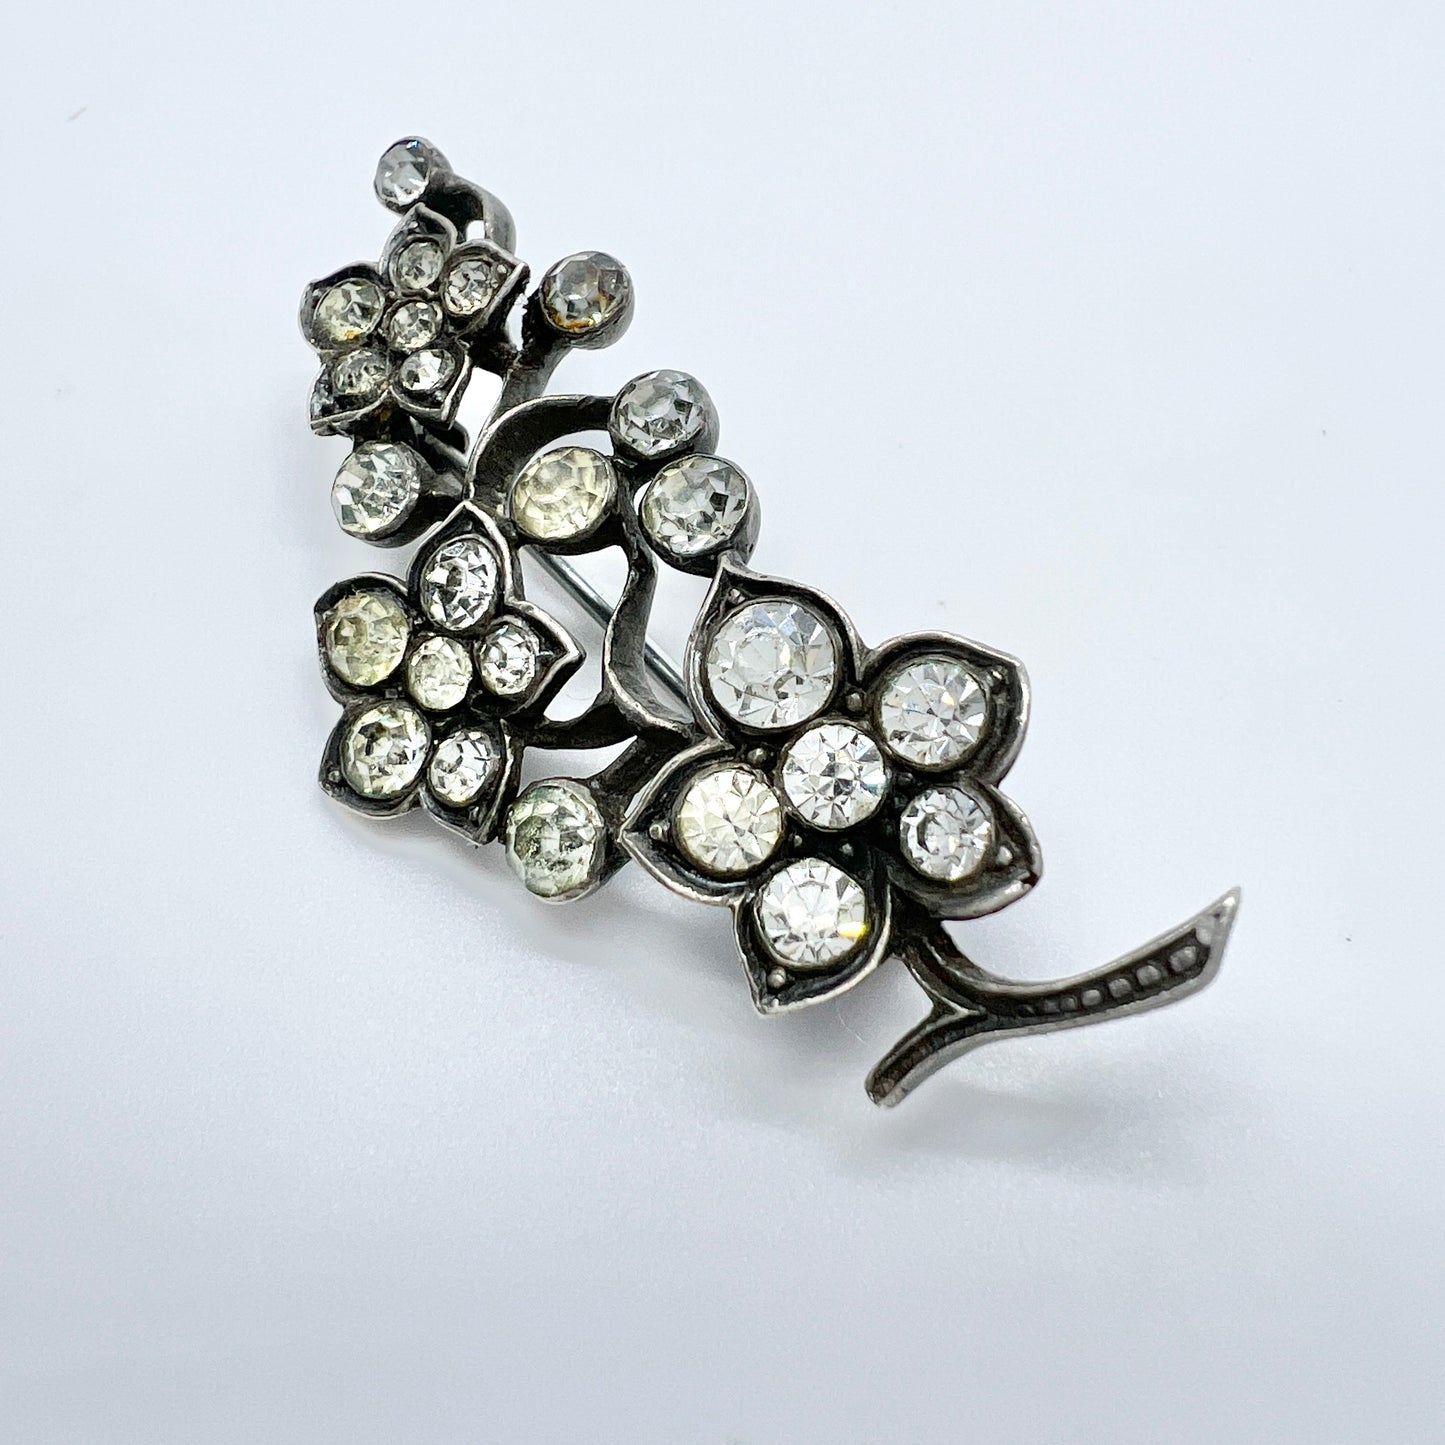 Knoll & Pregizer, Germany early 1900s. Solid Silver Paste Brooch.